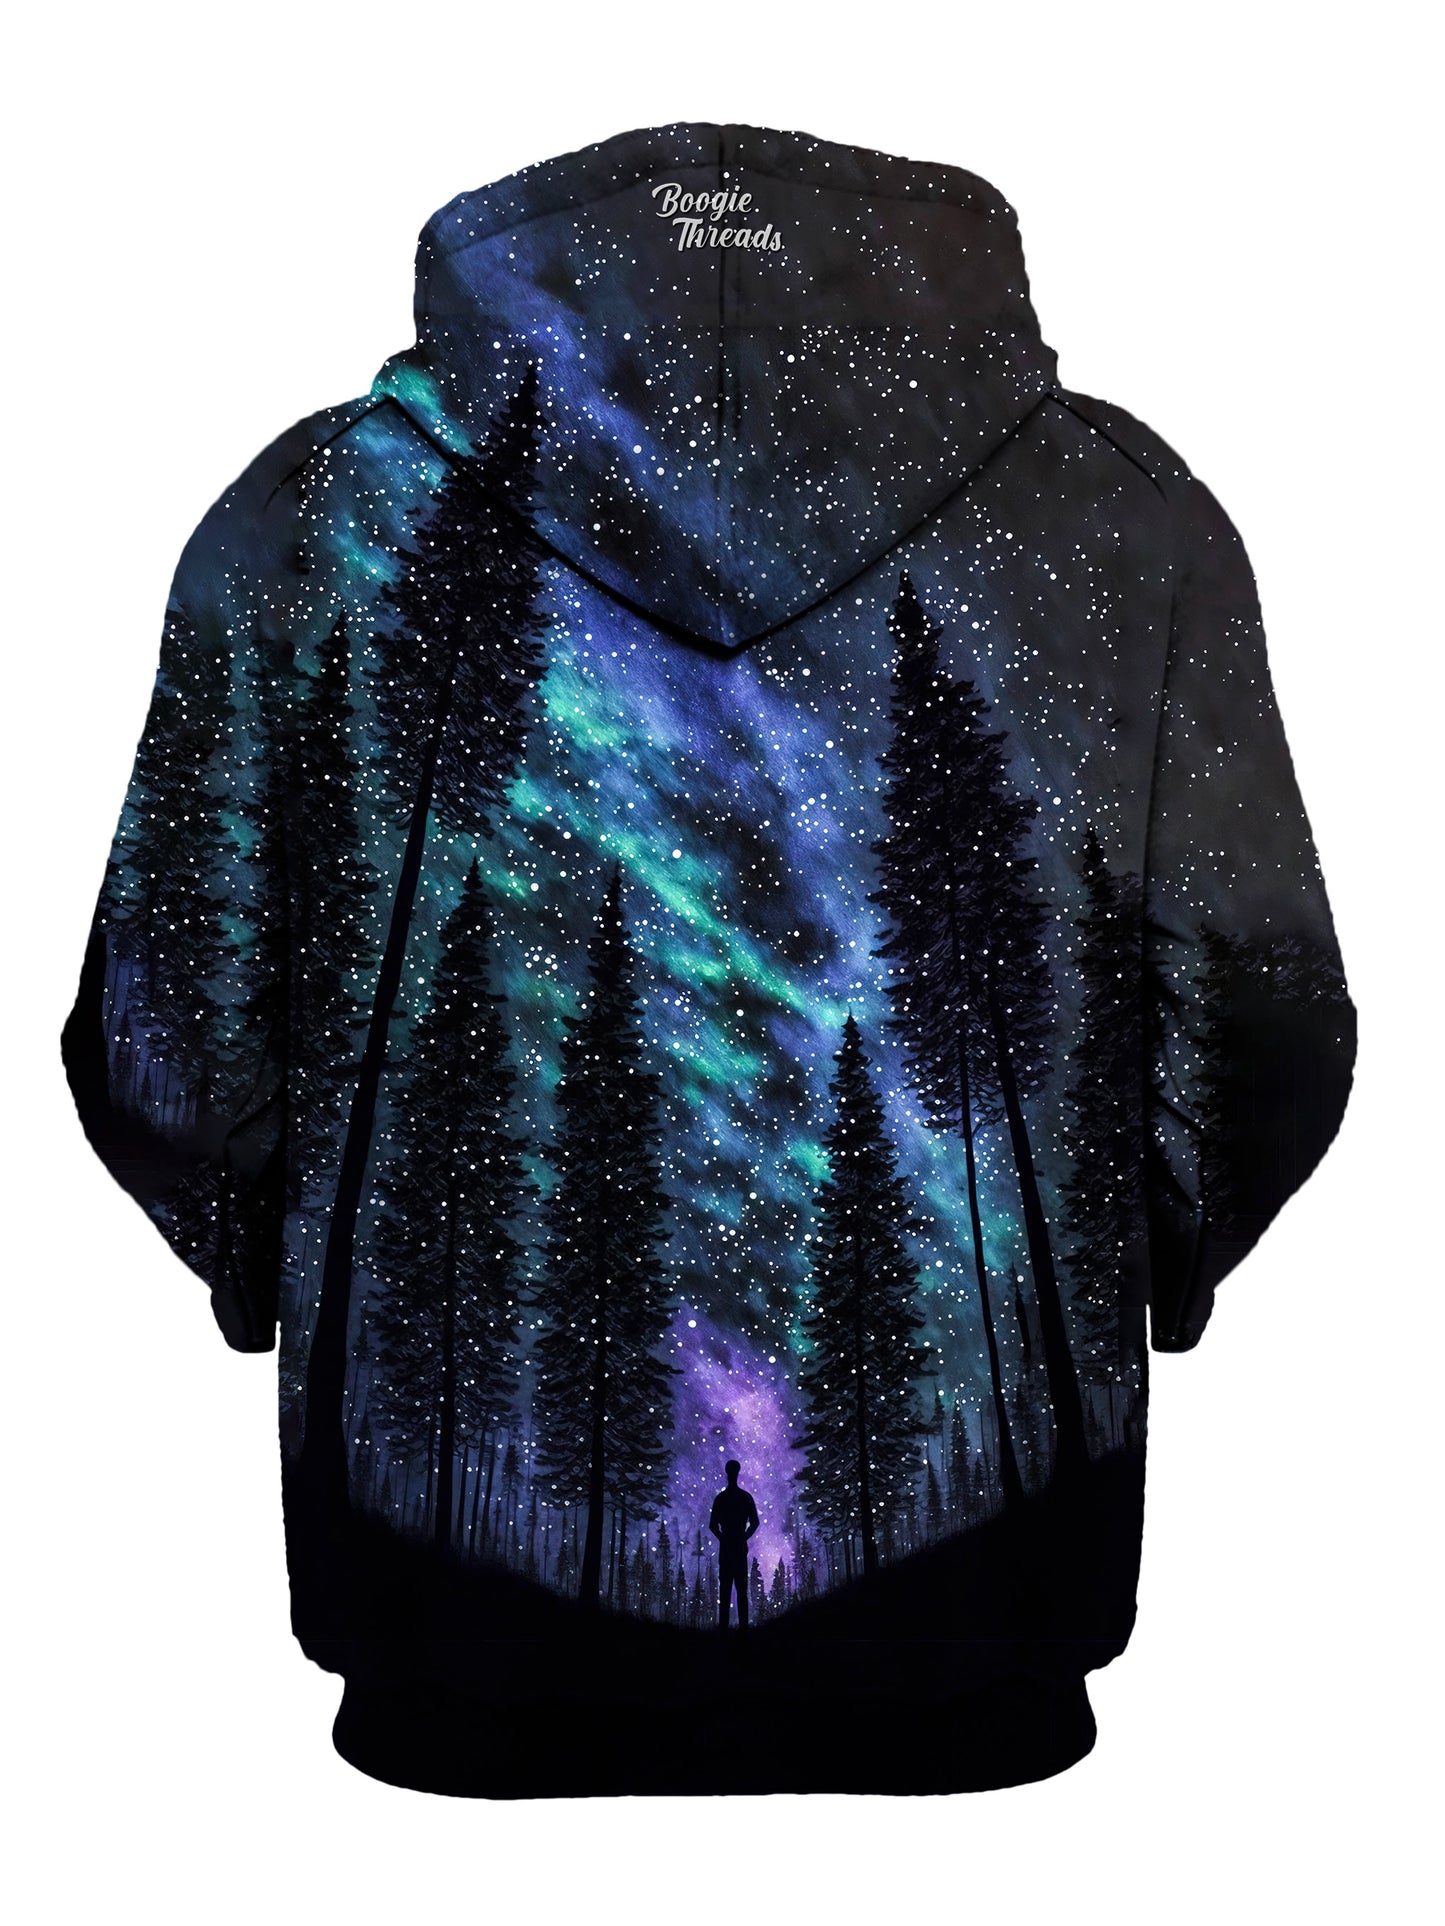 Stand out from the crowd in this bold and vibrant hoodie